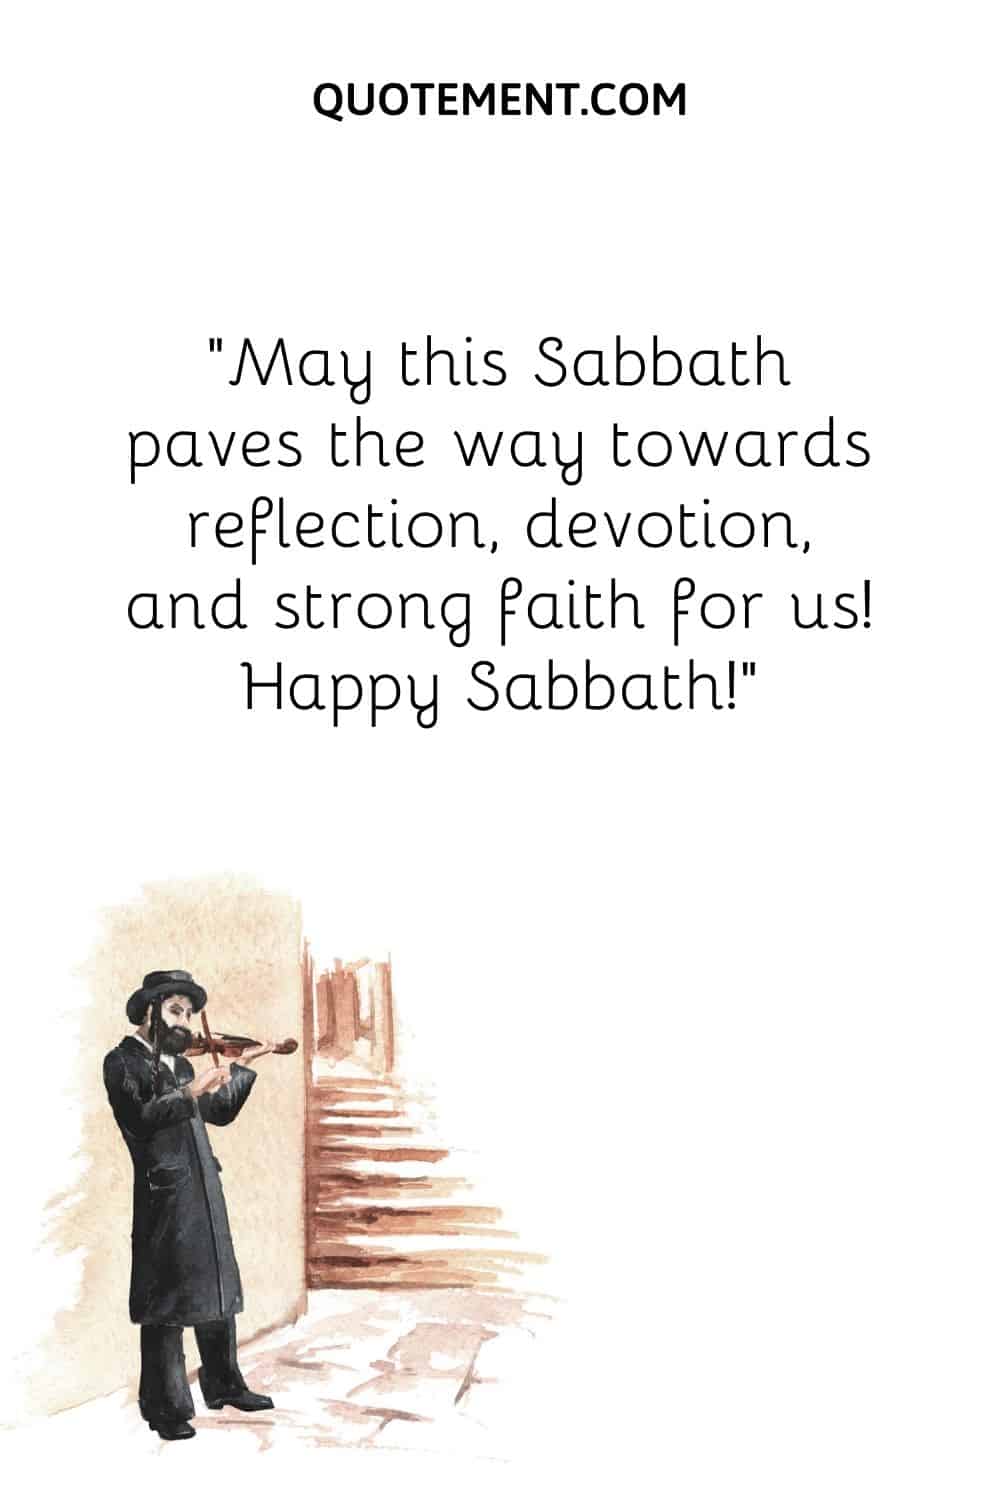 May this Sabbath paves the way towards reflection, devotion, and strong faith for us